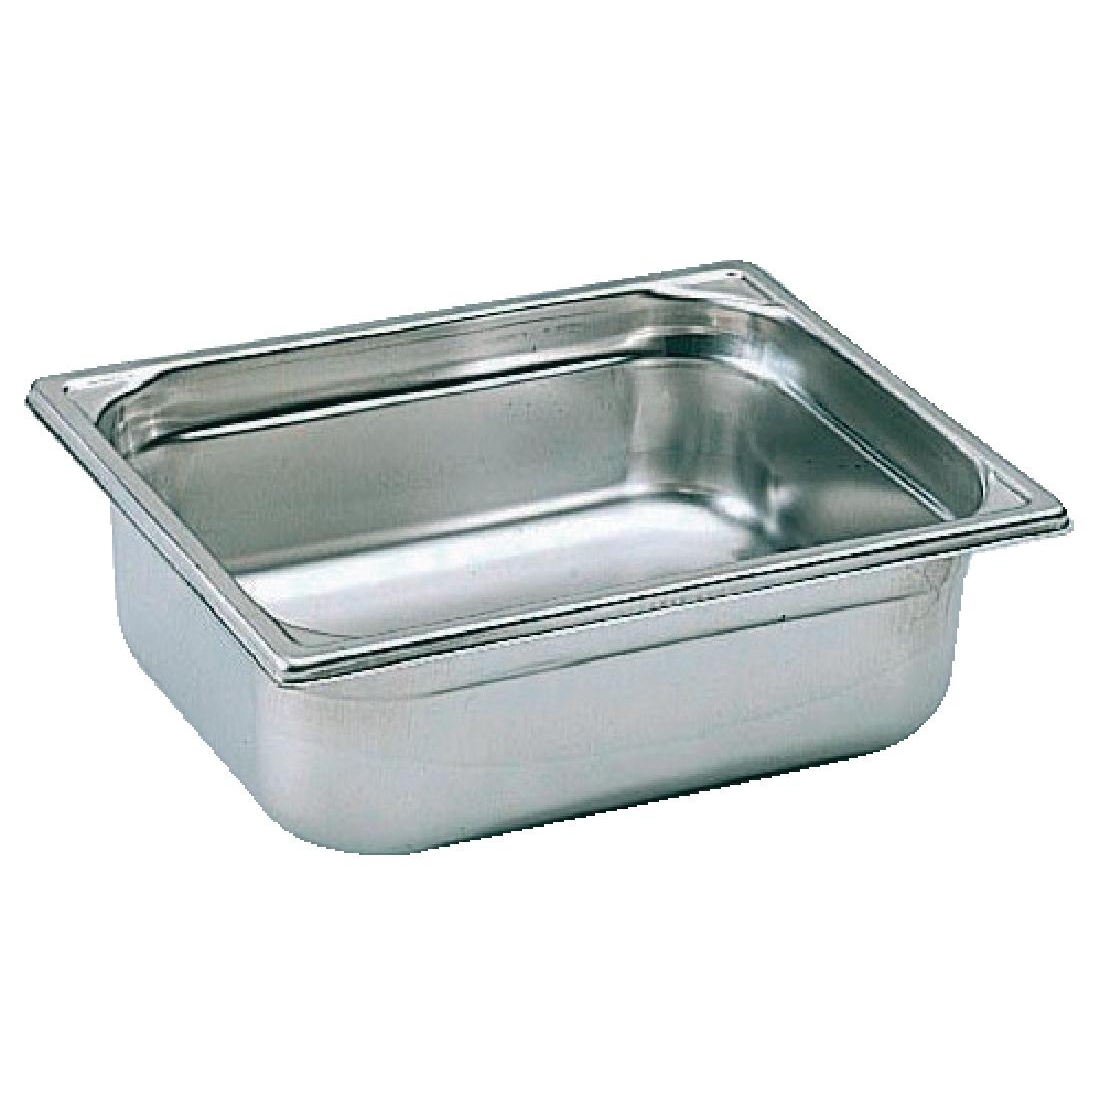 Bourgeat Stainless Steel 1/2 Gastronorm Pan 65mm